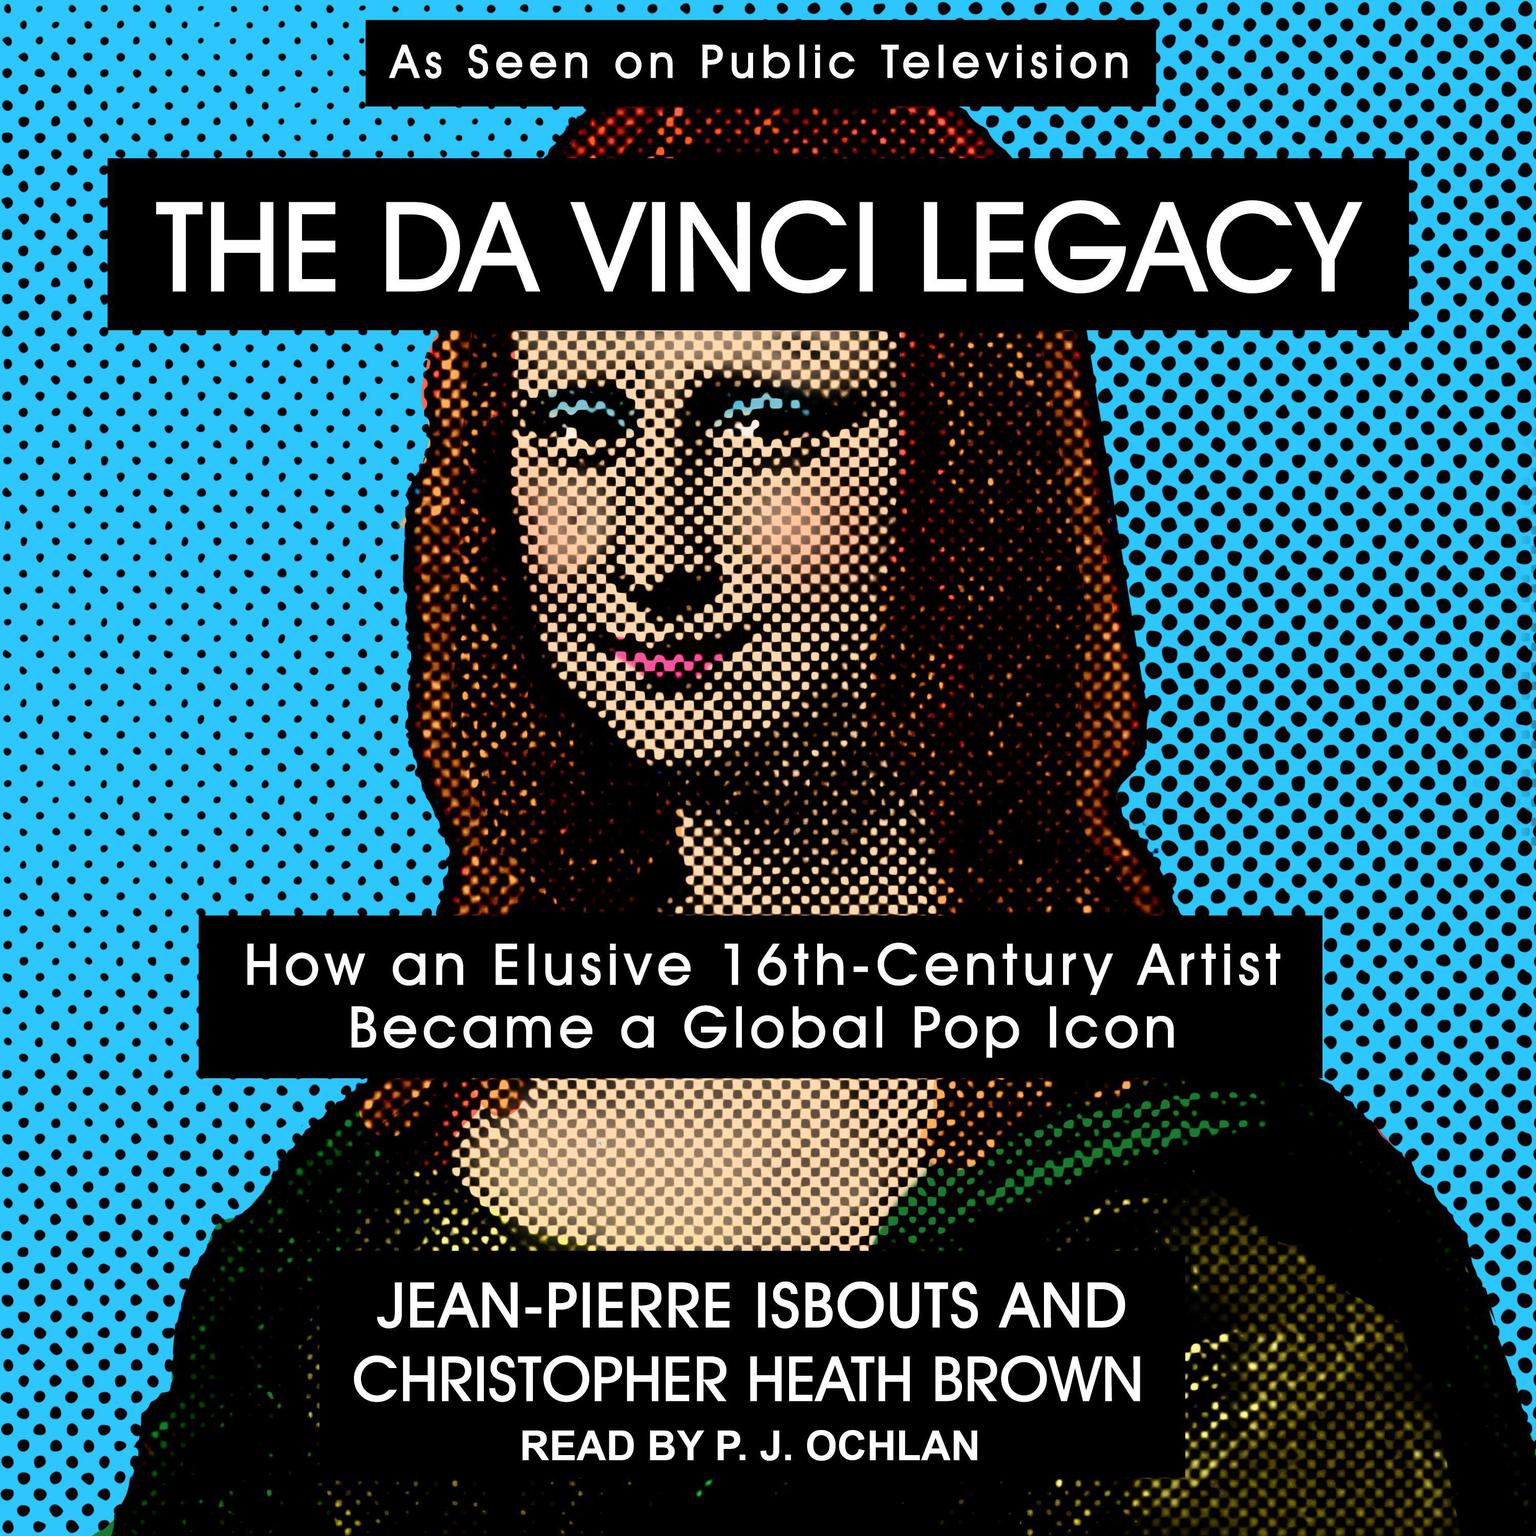 The da Vinci Legacy: How an Elusive 16th-Century Artist Became a Global Pop Icon Audiobook, by Jean-Pierre Isbouts